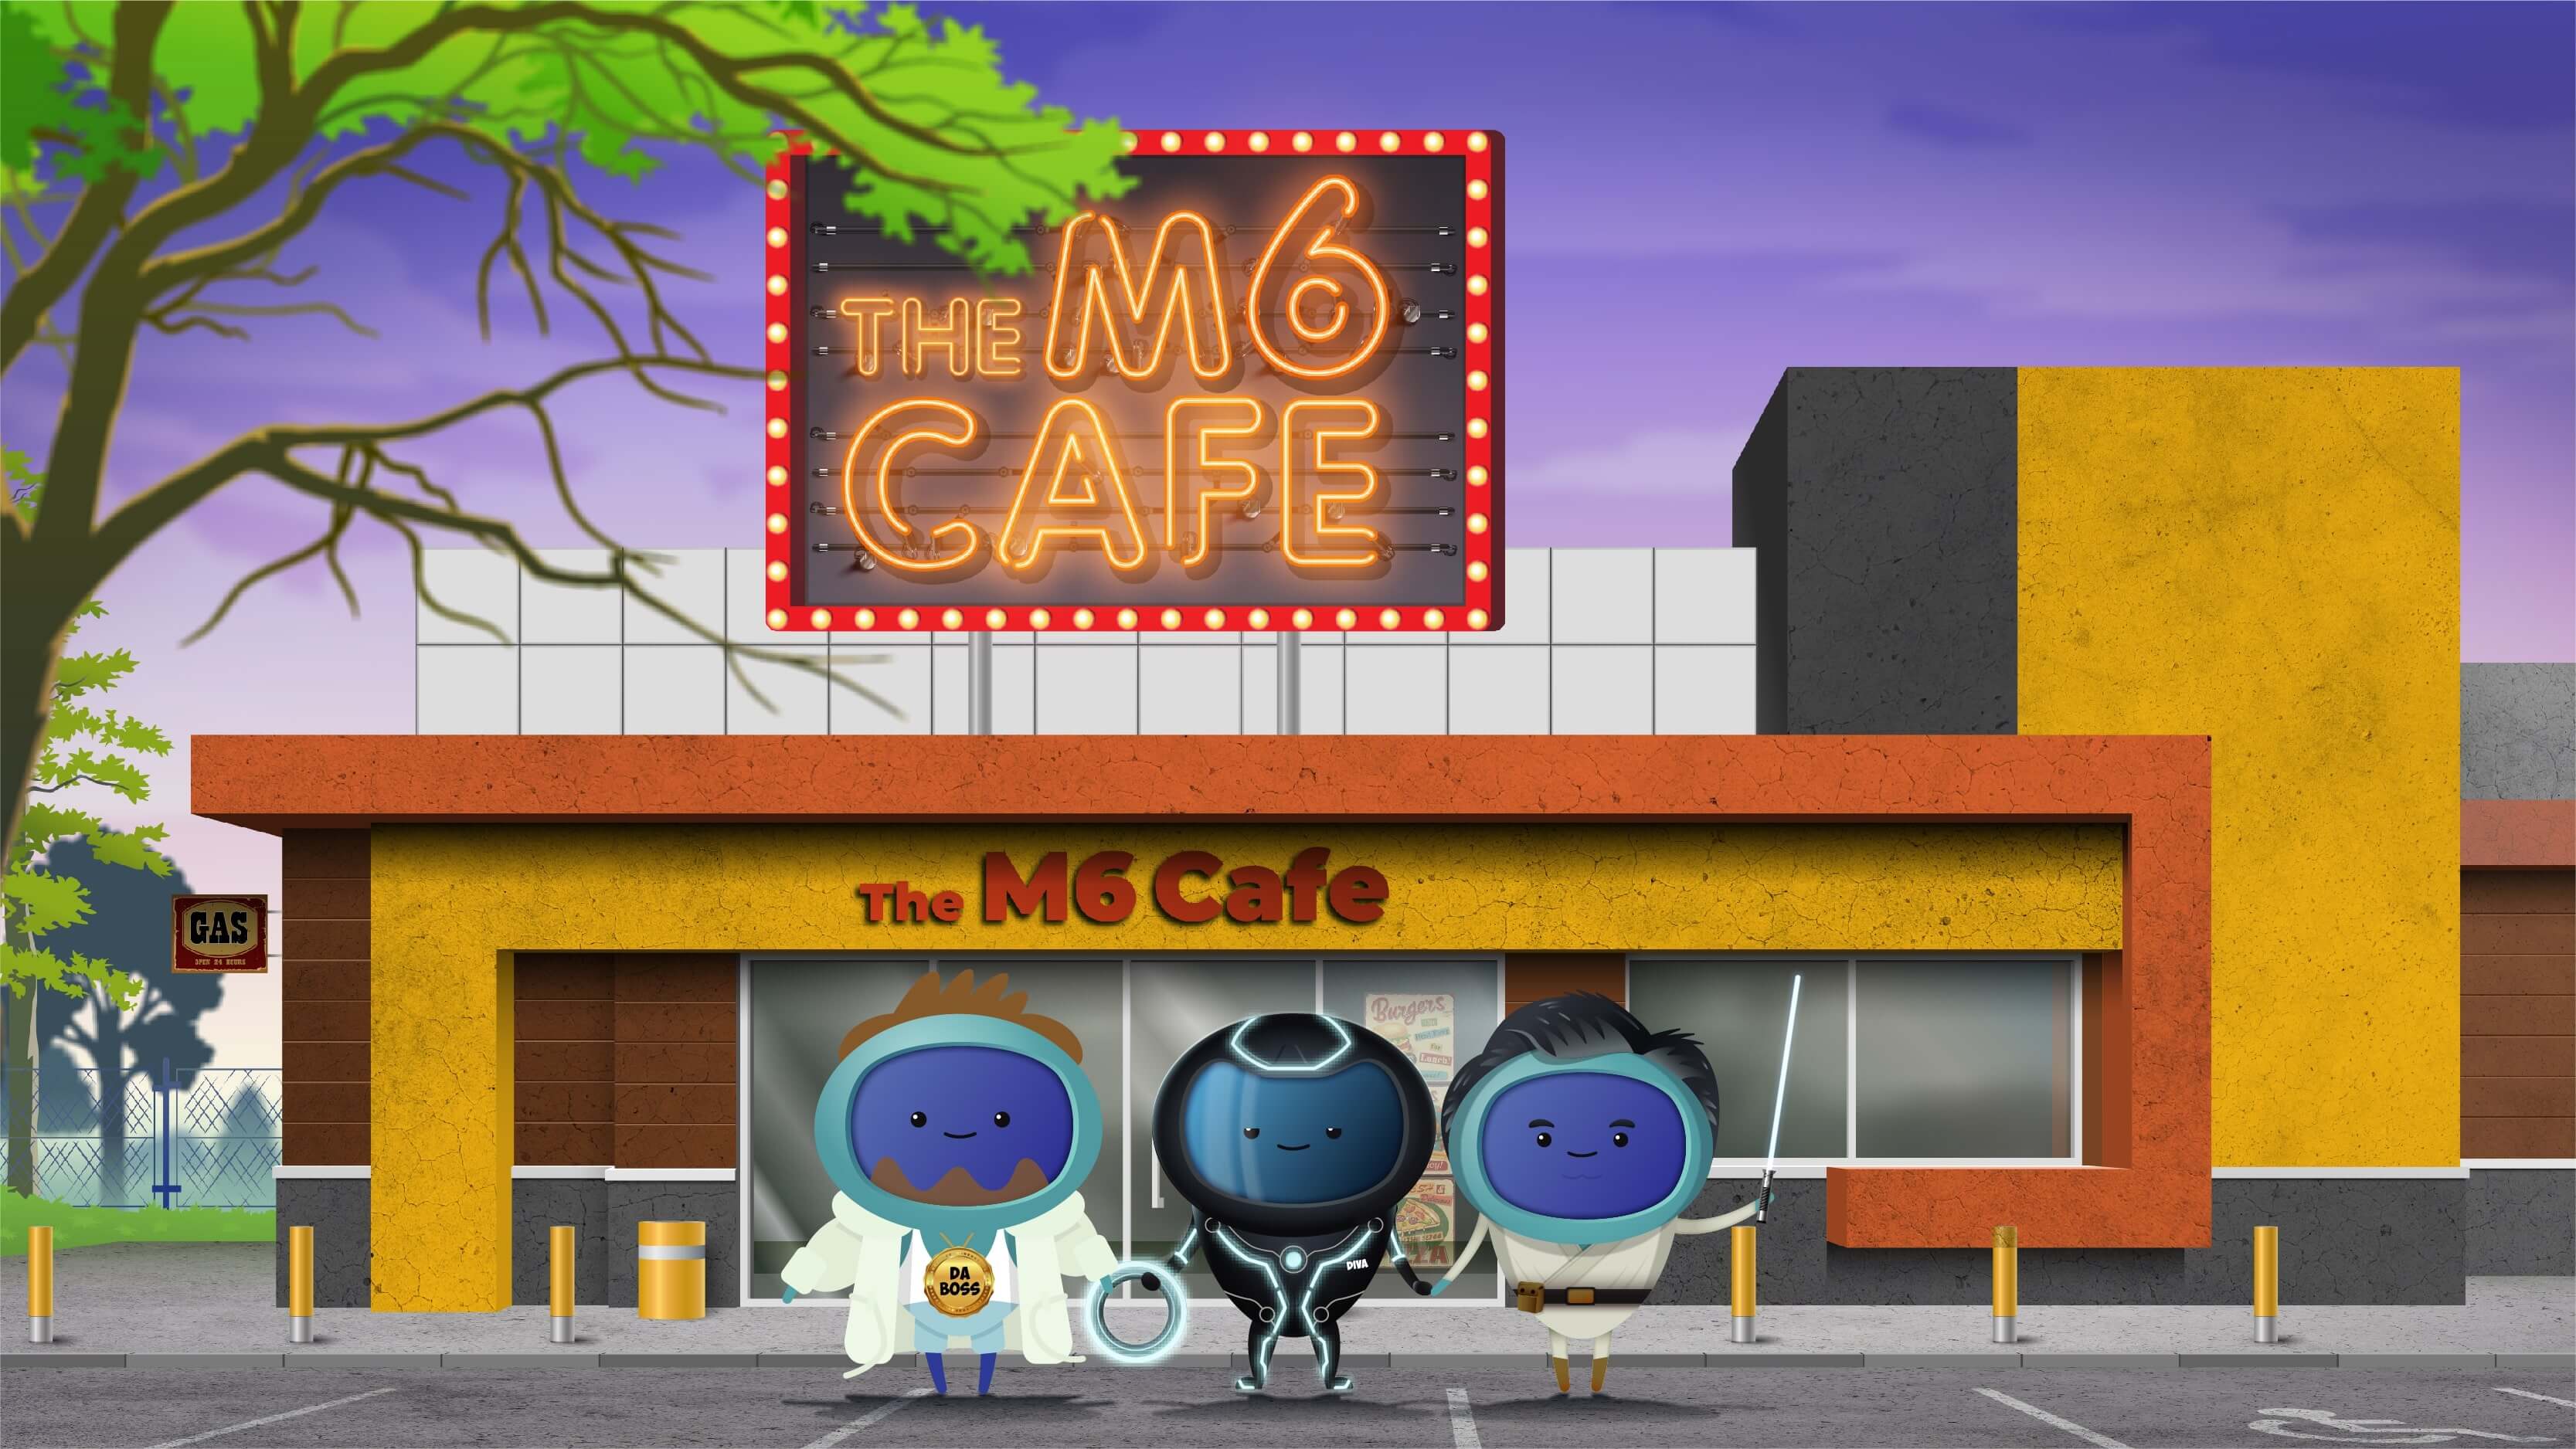 A group of characters outside The M6 Cafe